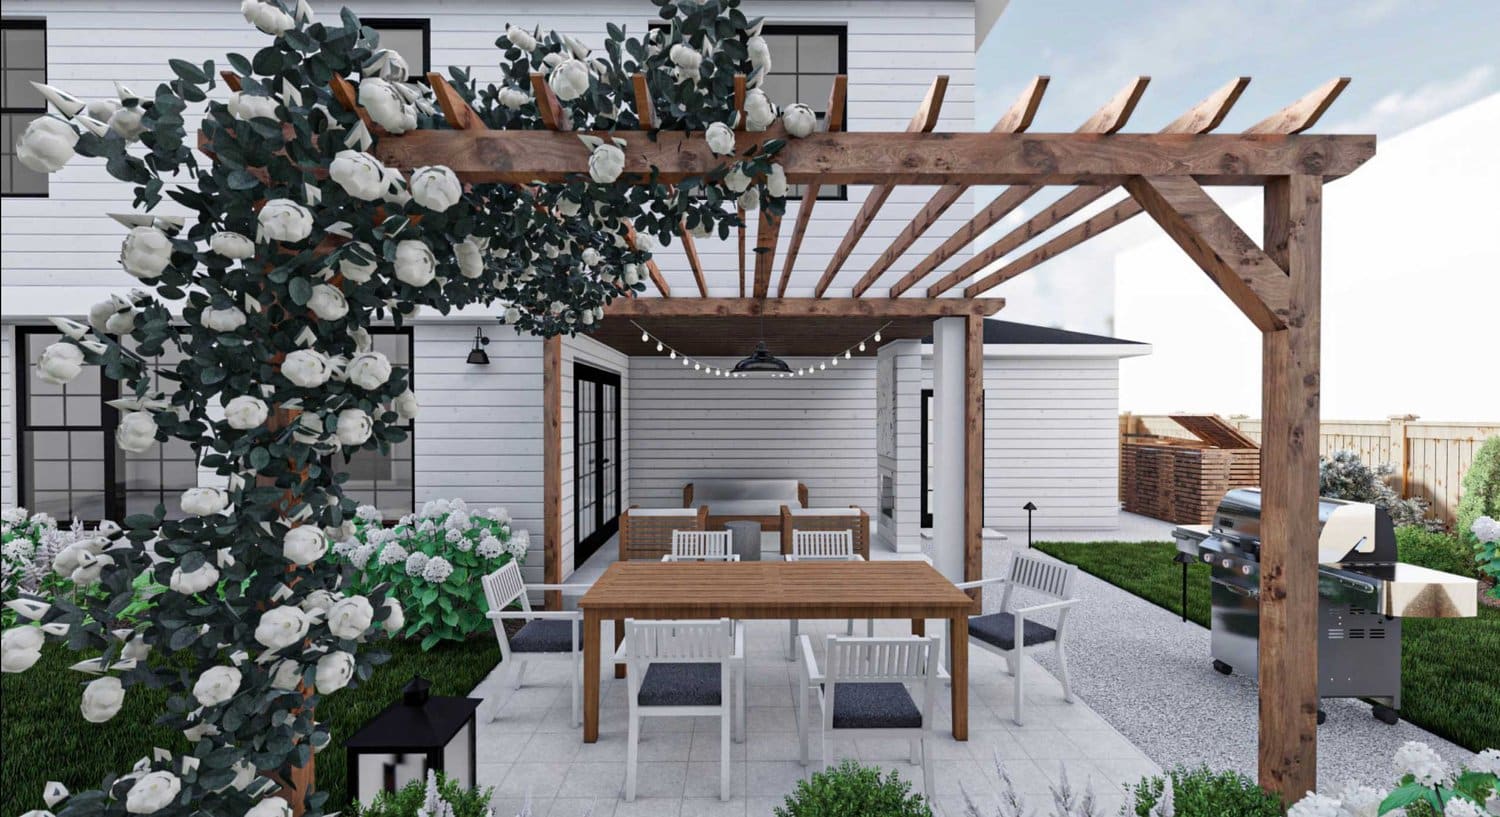 Tacoma backyard with patio, grill, trellis and gravel